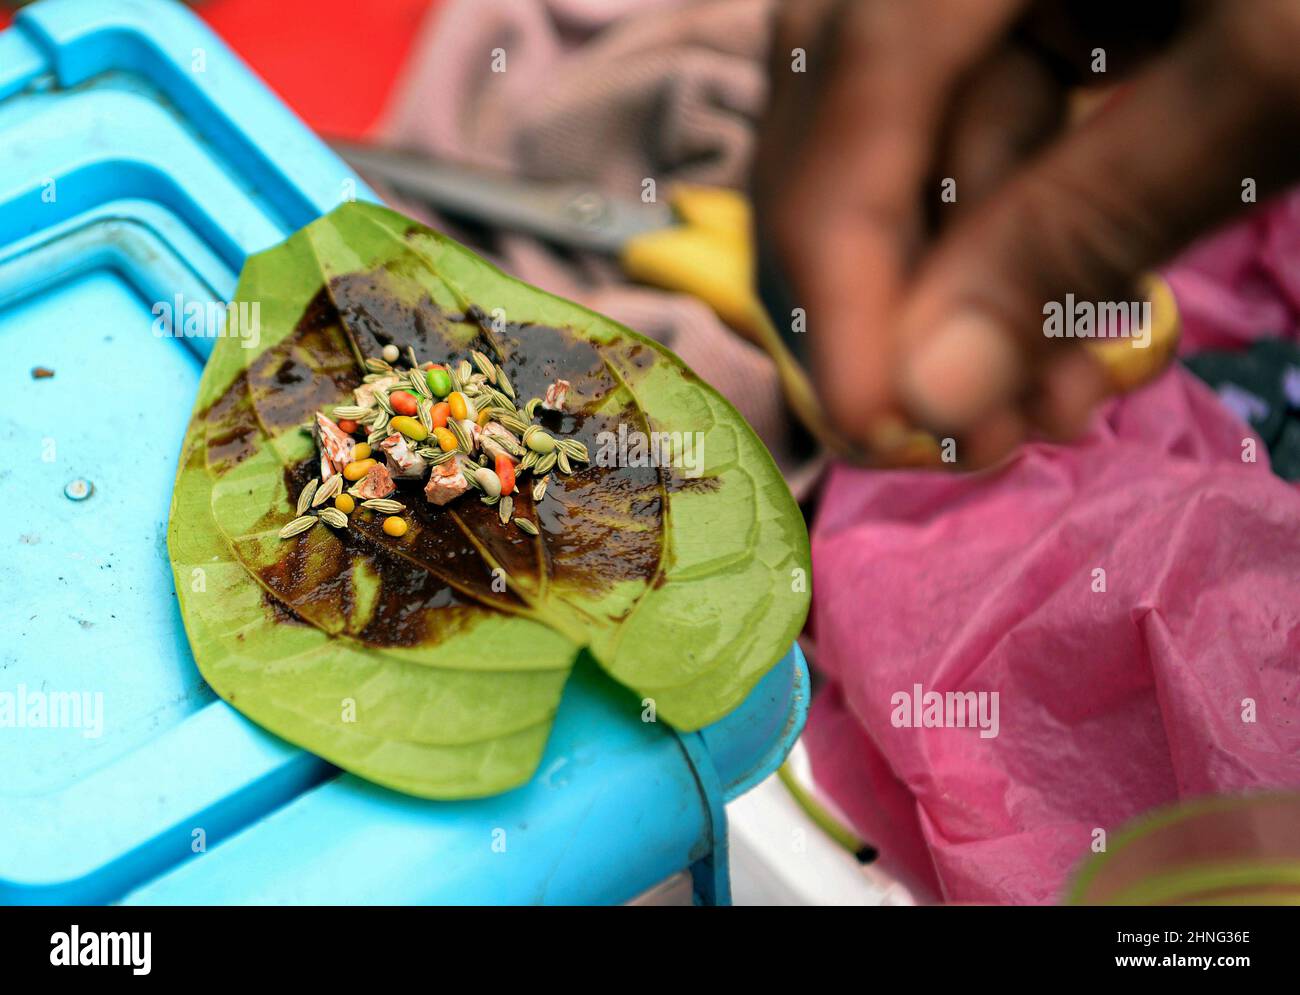 Bangkok, Thailand. 16th Feb, 2022. A close-up of a meetha paan, made of betel leaves filled with a range of sweet jam-like spreads and crunchy titbits like tutti-frutti, cherries, chopped dates, filled with chopped betel (areca) nut (Areca catechu) and slaked lime (chuna; calcium hydroxide) in Little India, Phahurat Market.The area is a 5 minutes walk from Bangkok's Chinatown and boasts the economy of a large northwestern Sikh community. Credit: SOPA Images Limited/Alamy Live News Stock Photo